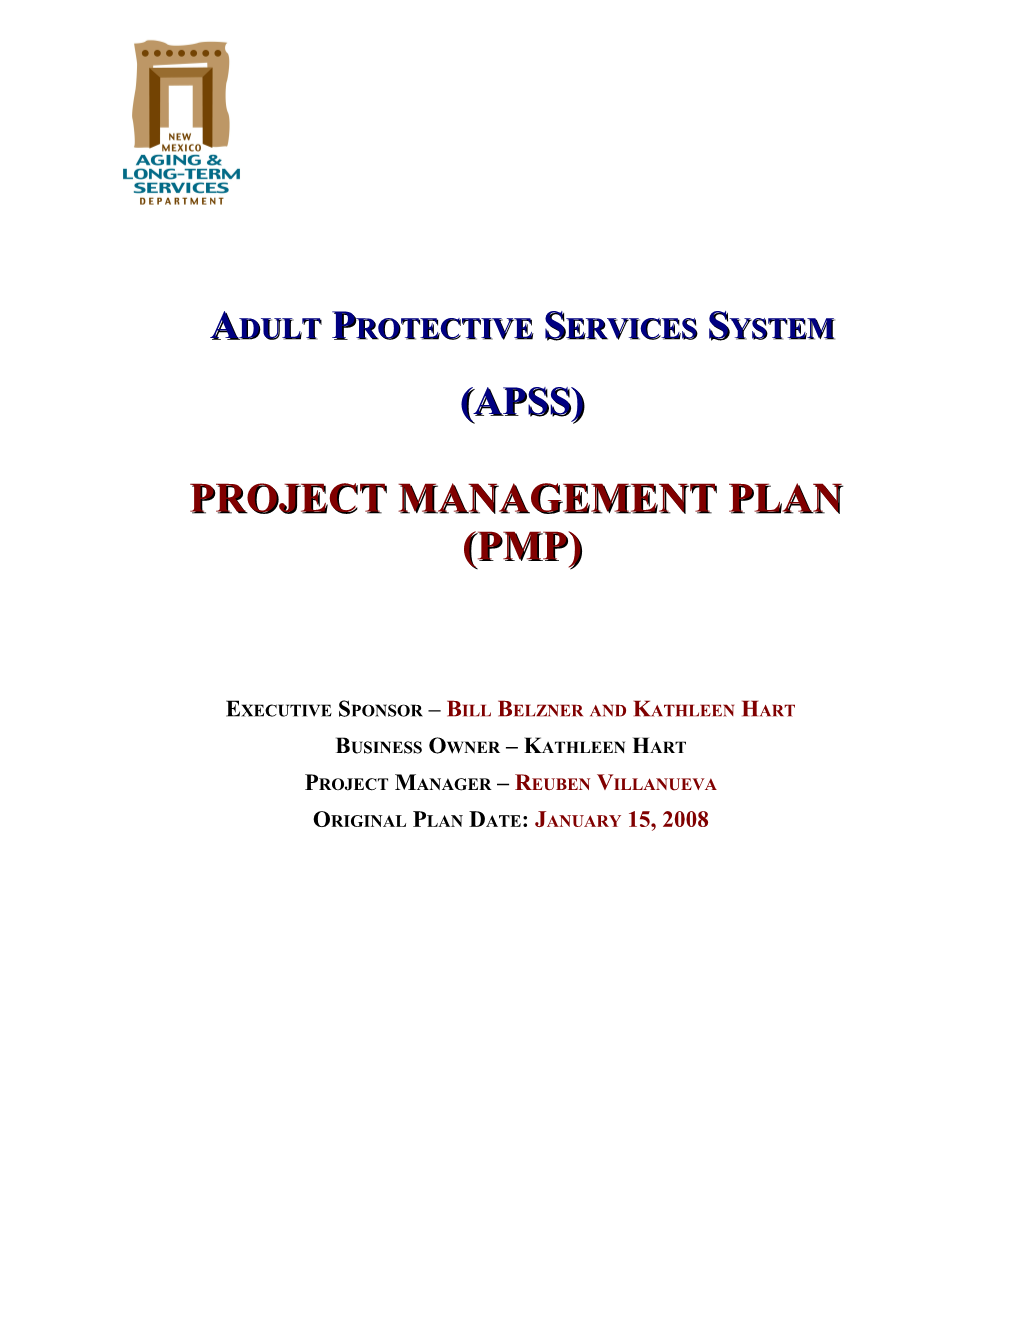 Adult Protective Services System